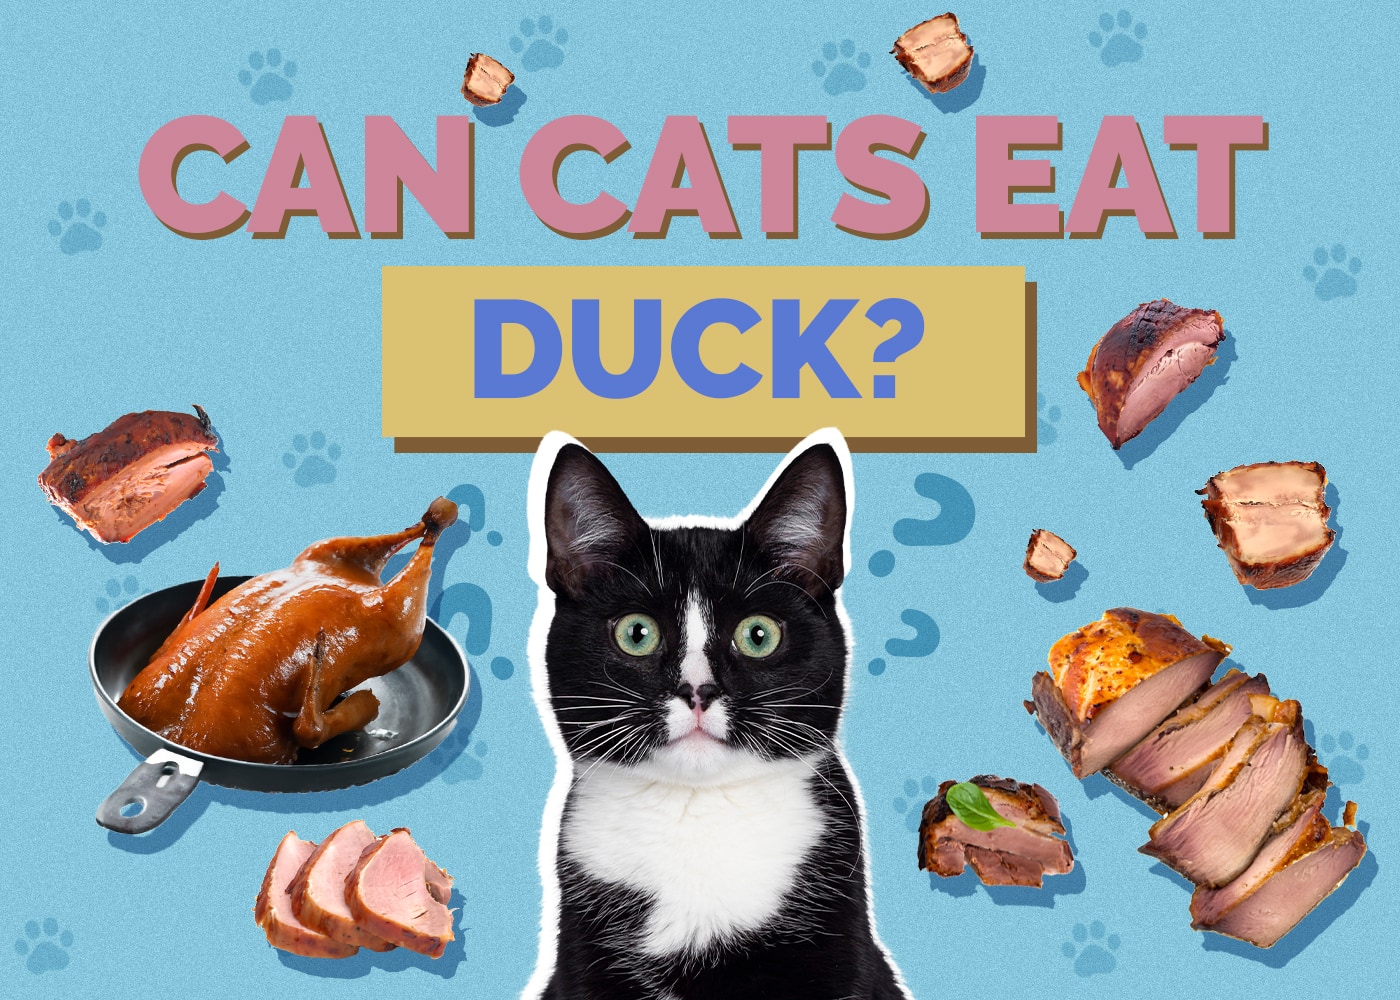 Can Cats Eat duck